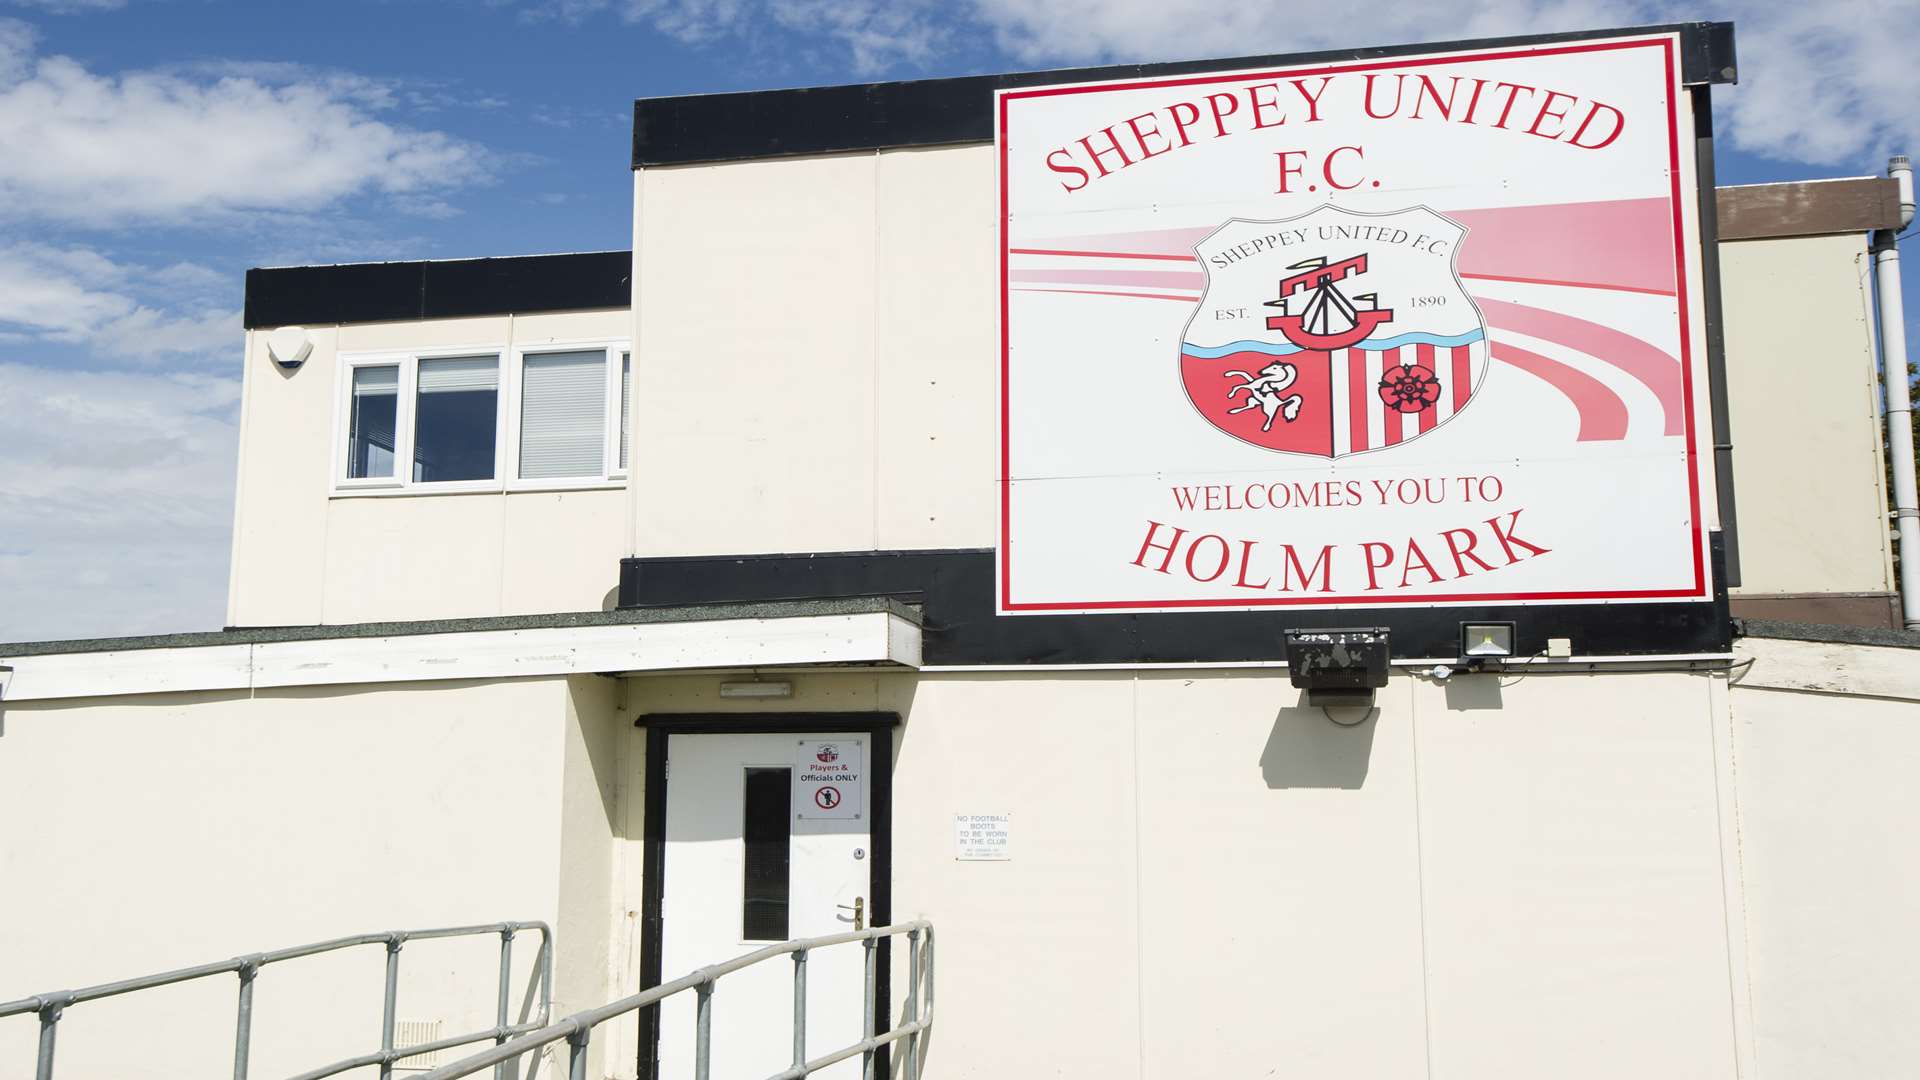 View of the grounds at Holm Park, the home ground of Sheppey United, at Holm Place, Halfway, Sheppey.